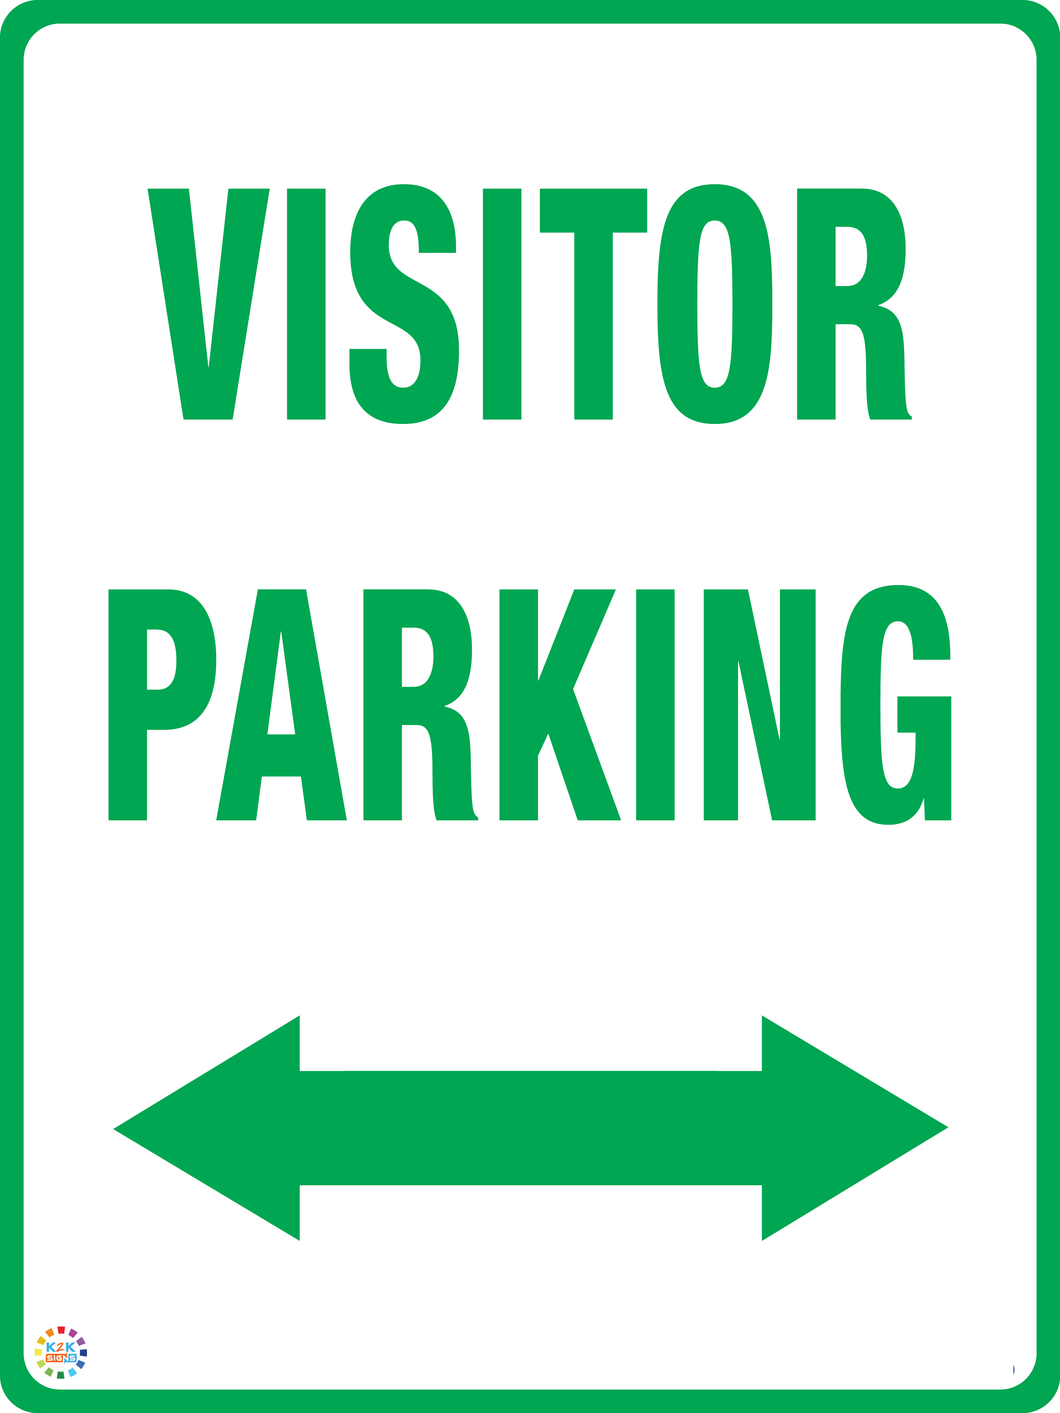 Visitor Parking (Two Way Arrow) Sign